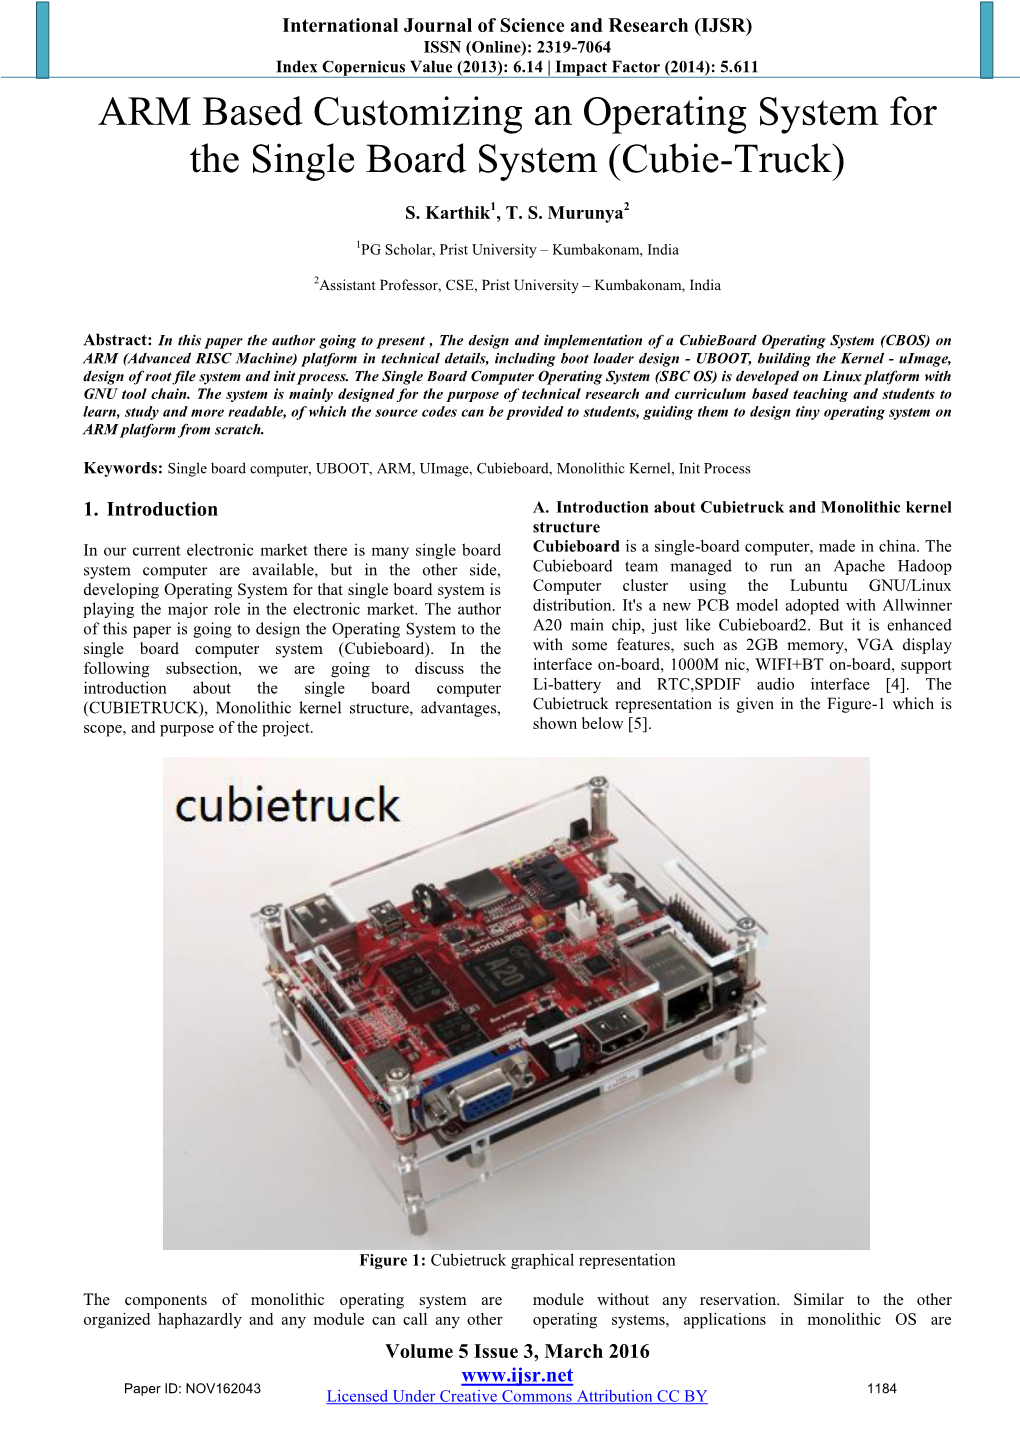 ARM Based Customizing an Operating System for the Single Board System (Cubie-Truck)